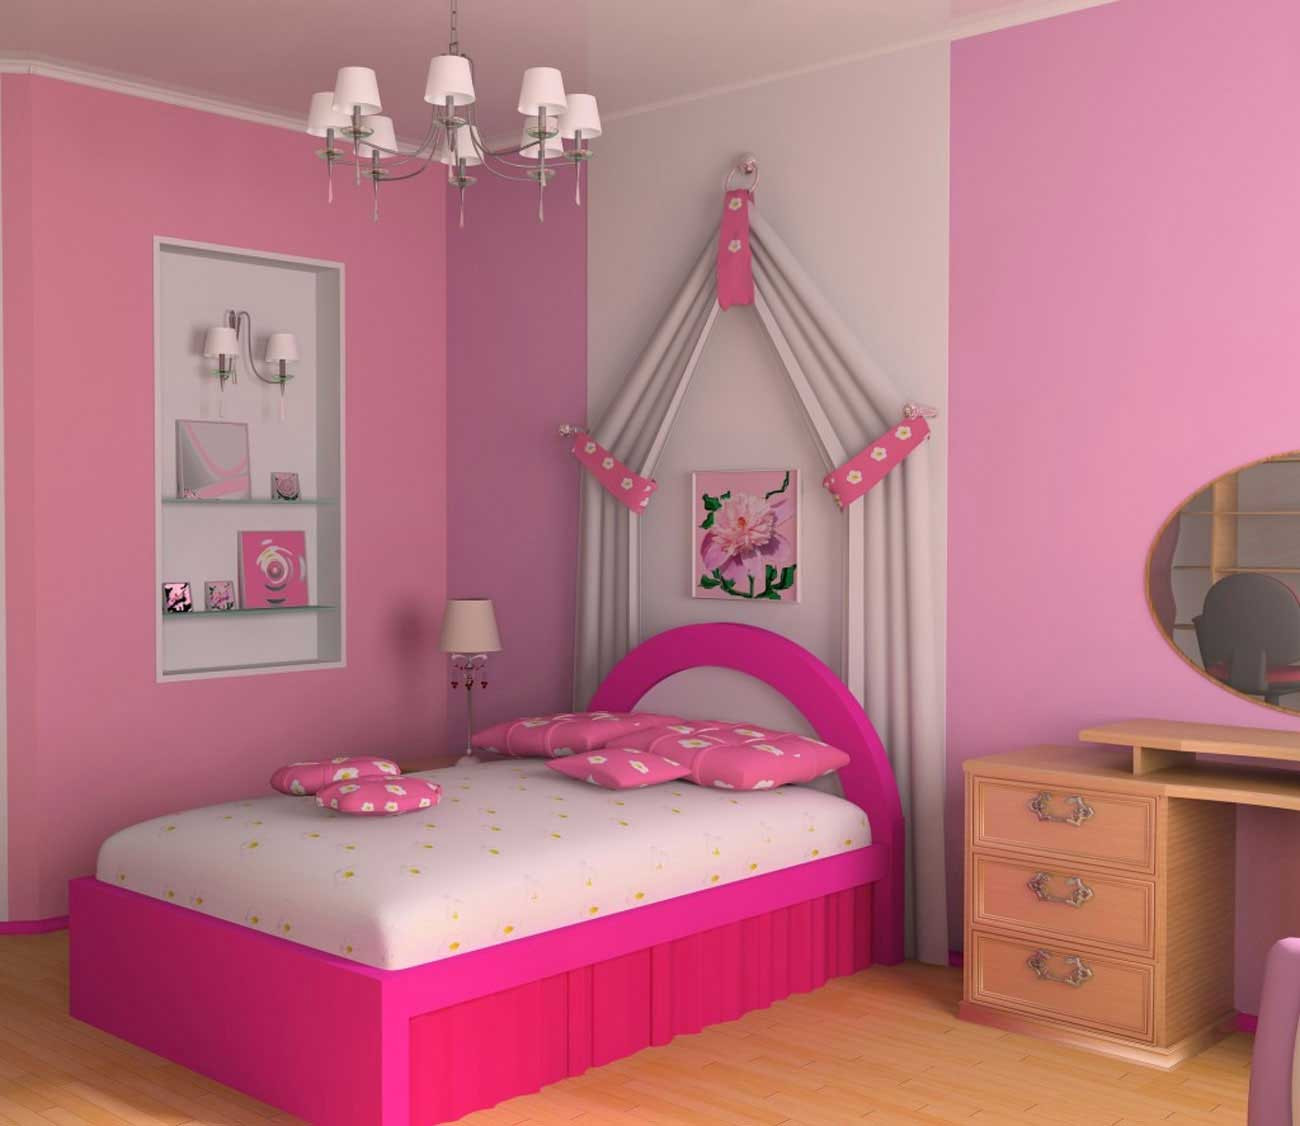 Painting Ideas For Girl Bedroom
 Interior Paint Ideas Attractive Color Scheme Toward